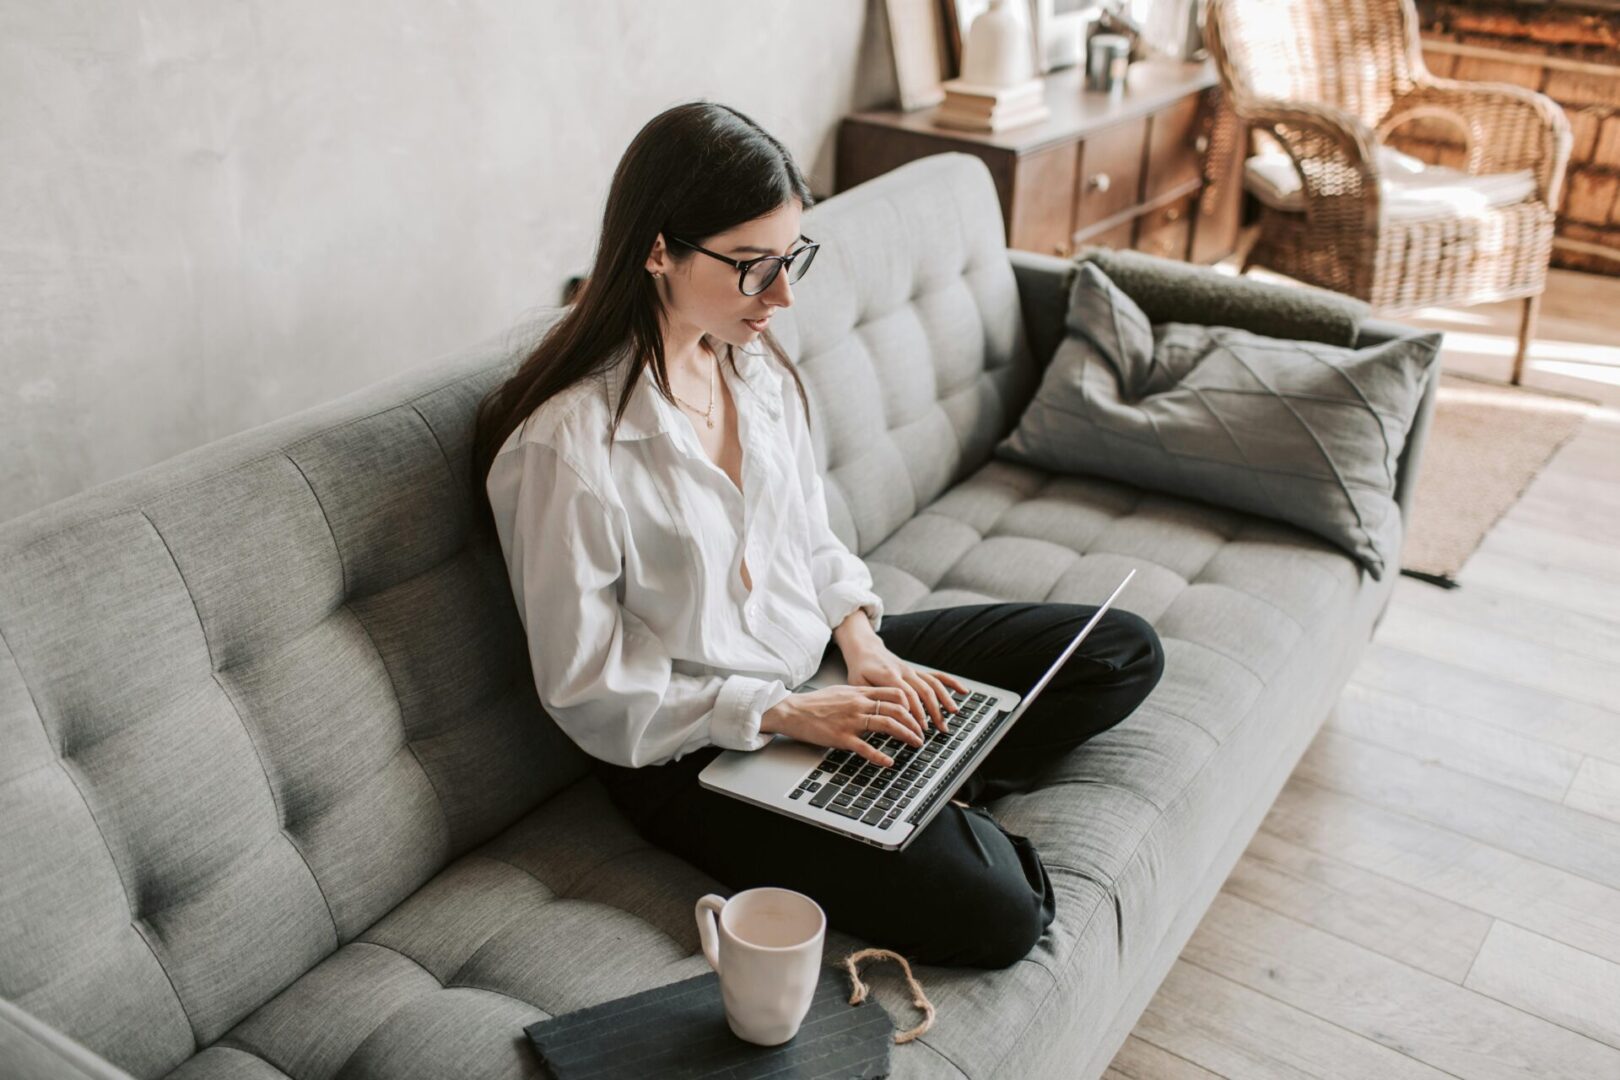 A woman sitting on the couch with her laptop.